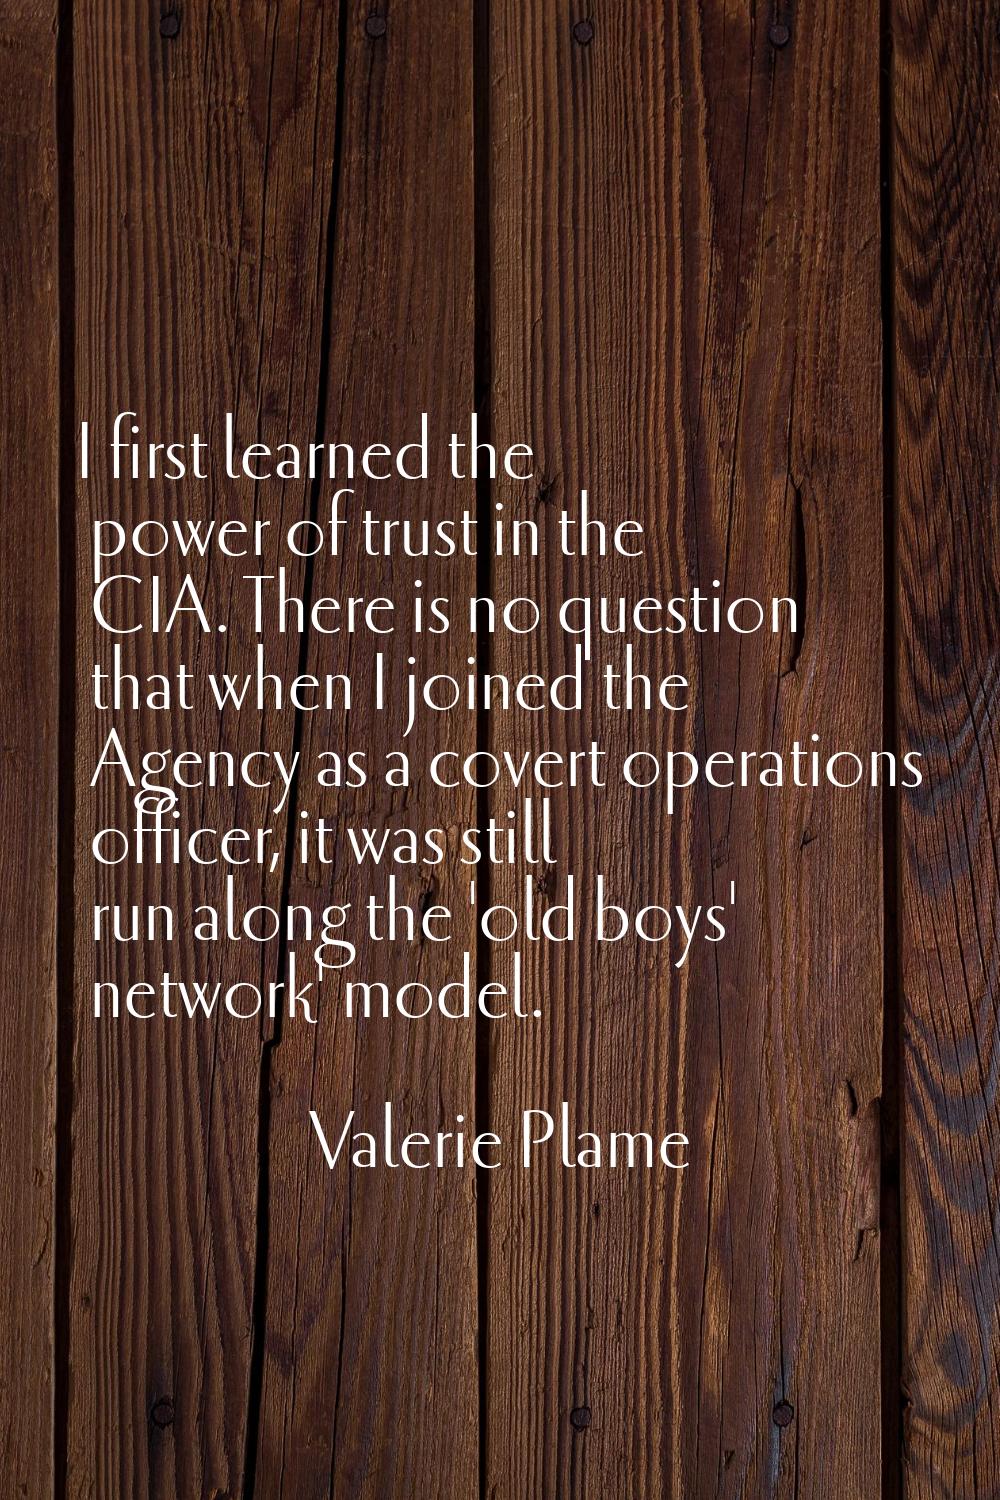 I first learned the power of trust in the CIA. There is no question that when I joined the Agency a